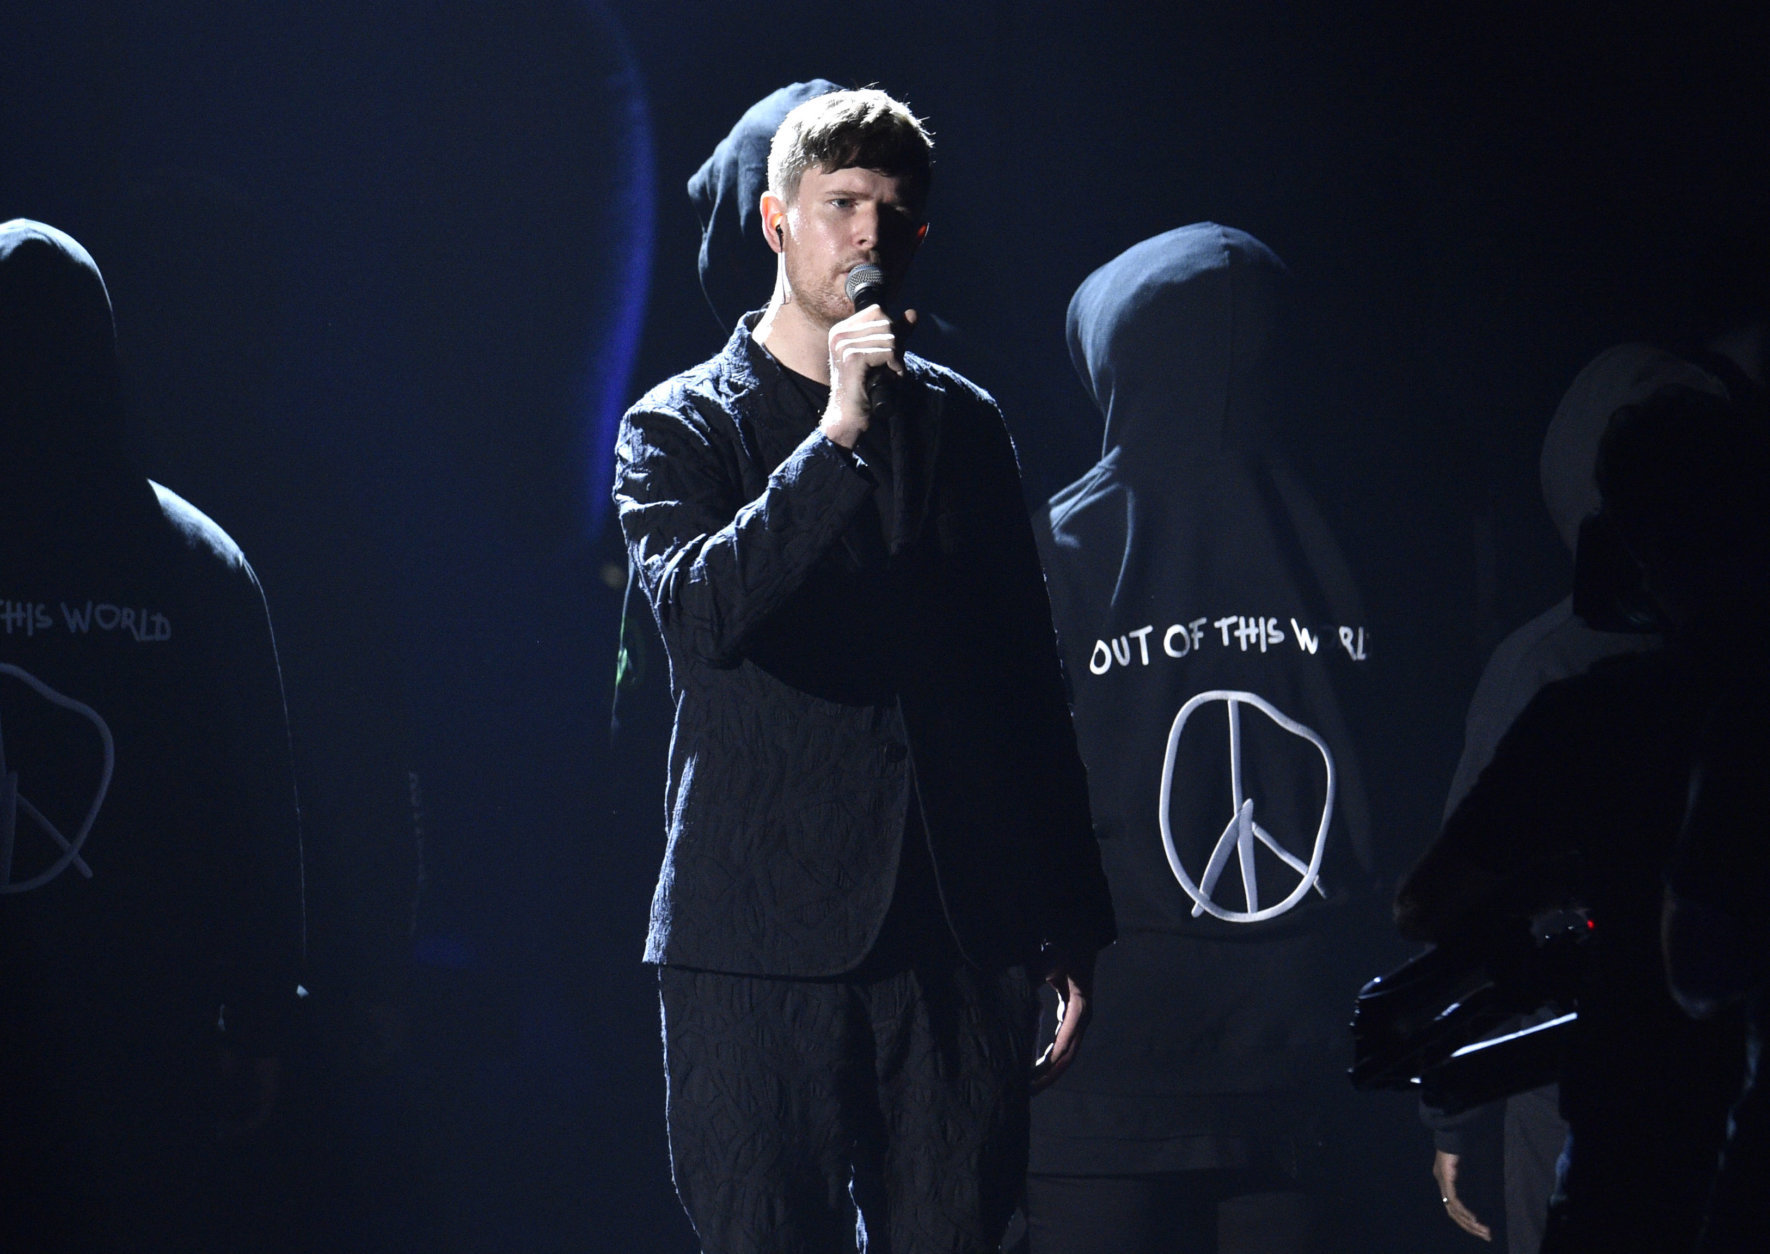 James Blake performs at the MTV Video Music Awards at Radio City Music Hall on Monday, Aug. 20, 2018, in New York. (Photo by Chris Pizzello/Invision/AP)